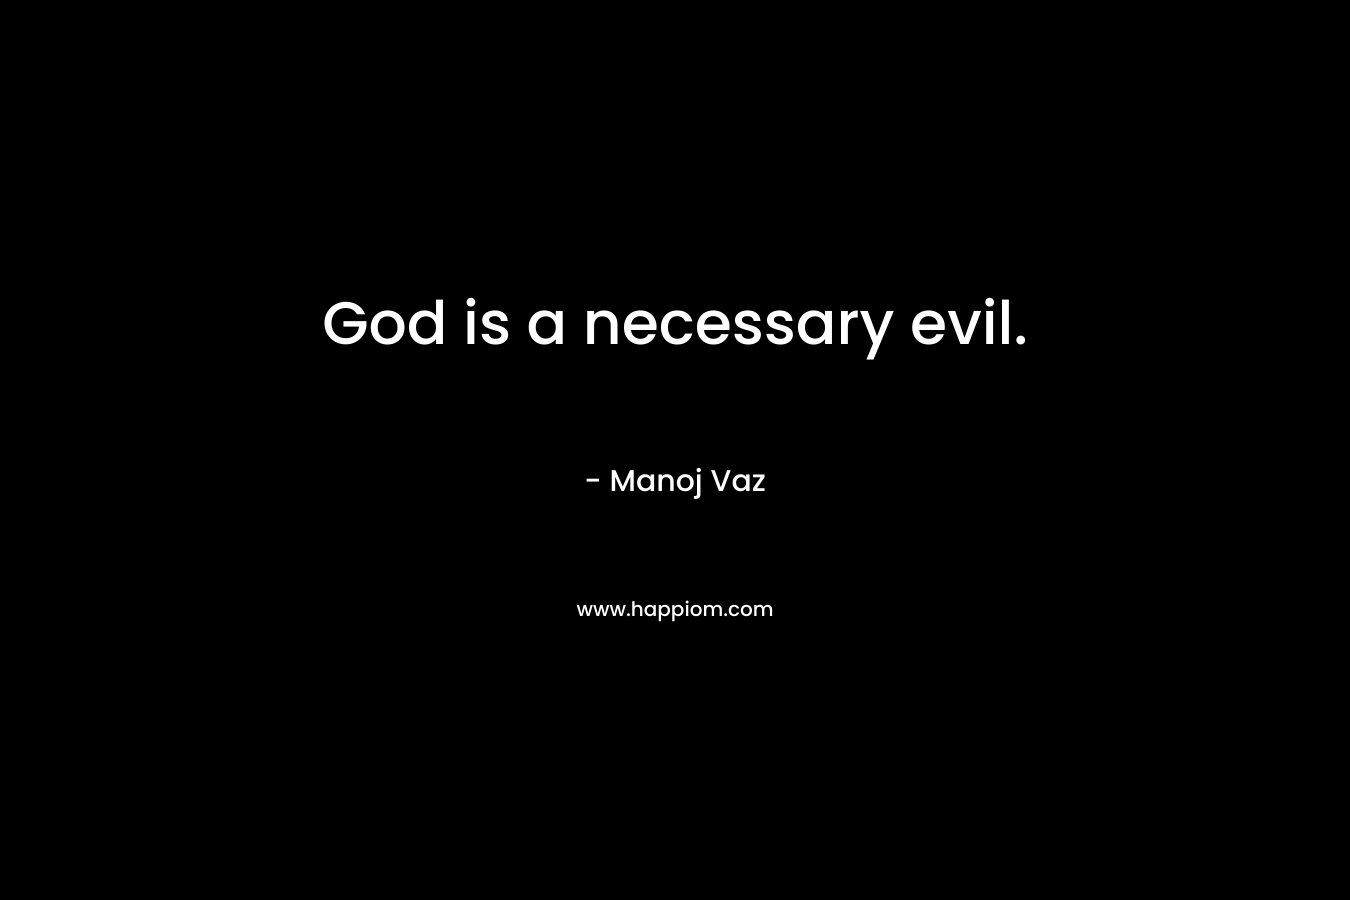 God is a necessary evil.